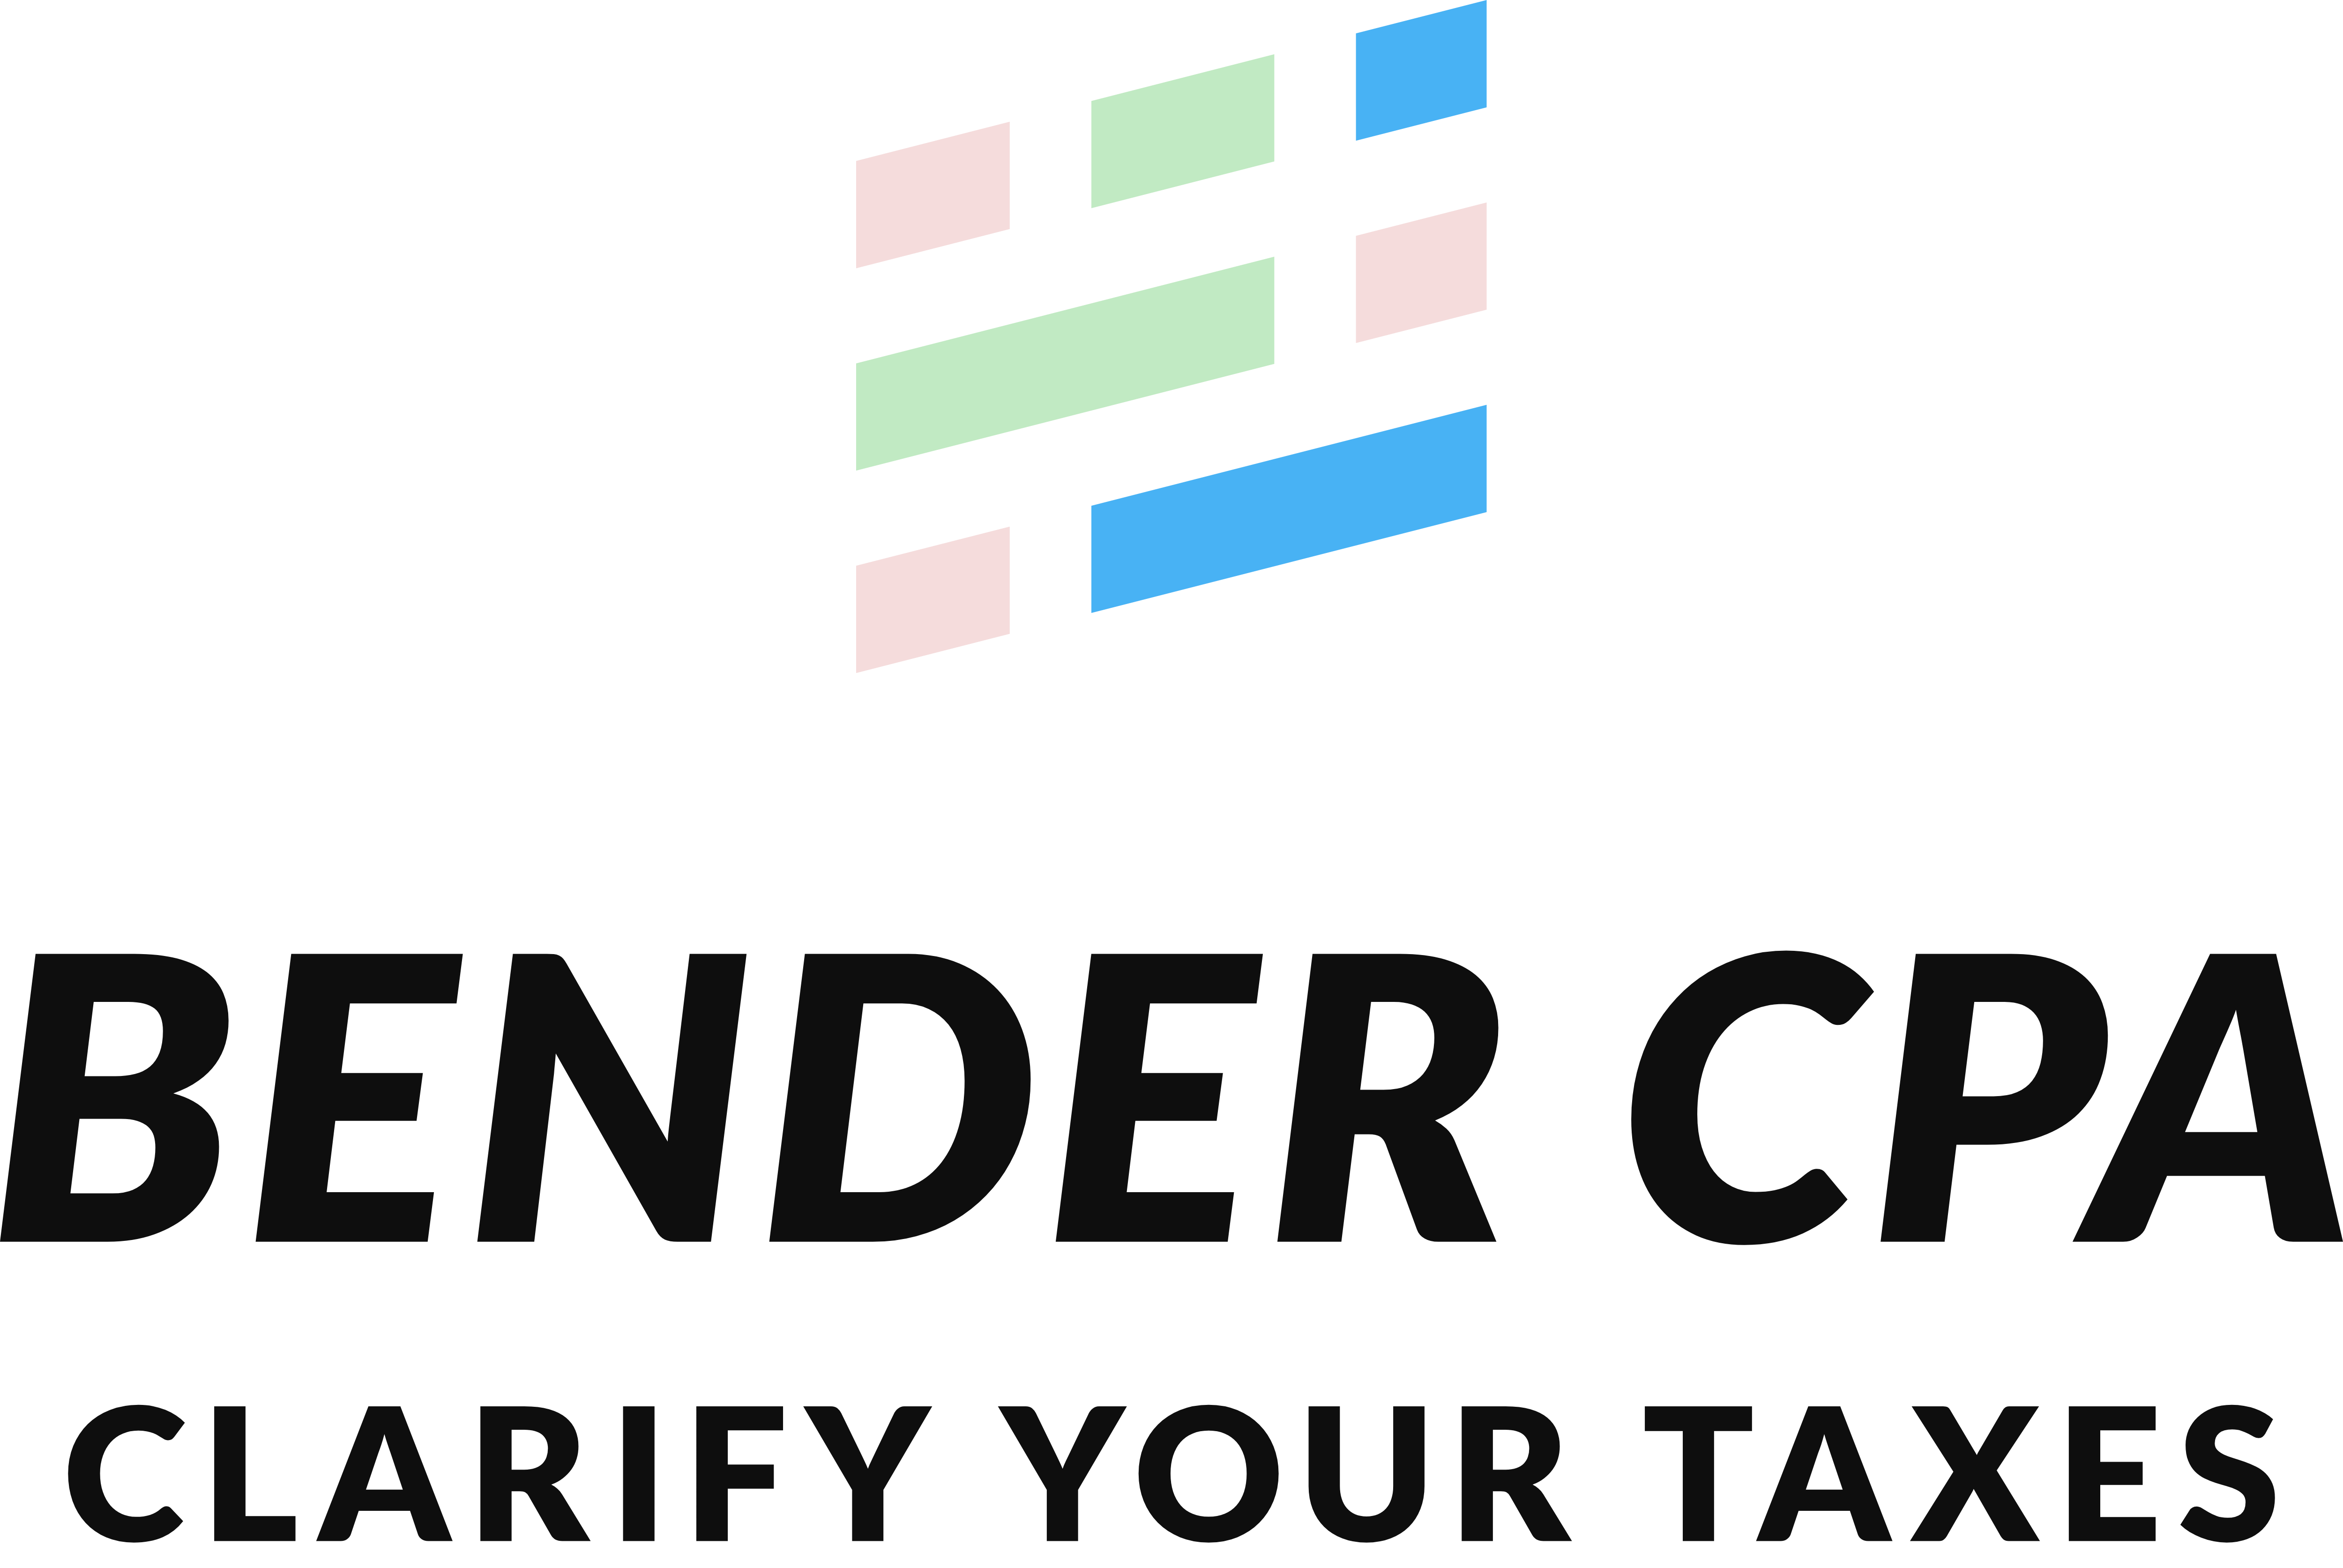 Bender CPA | Clarify Your Taxes